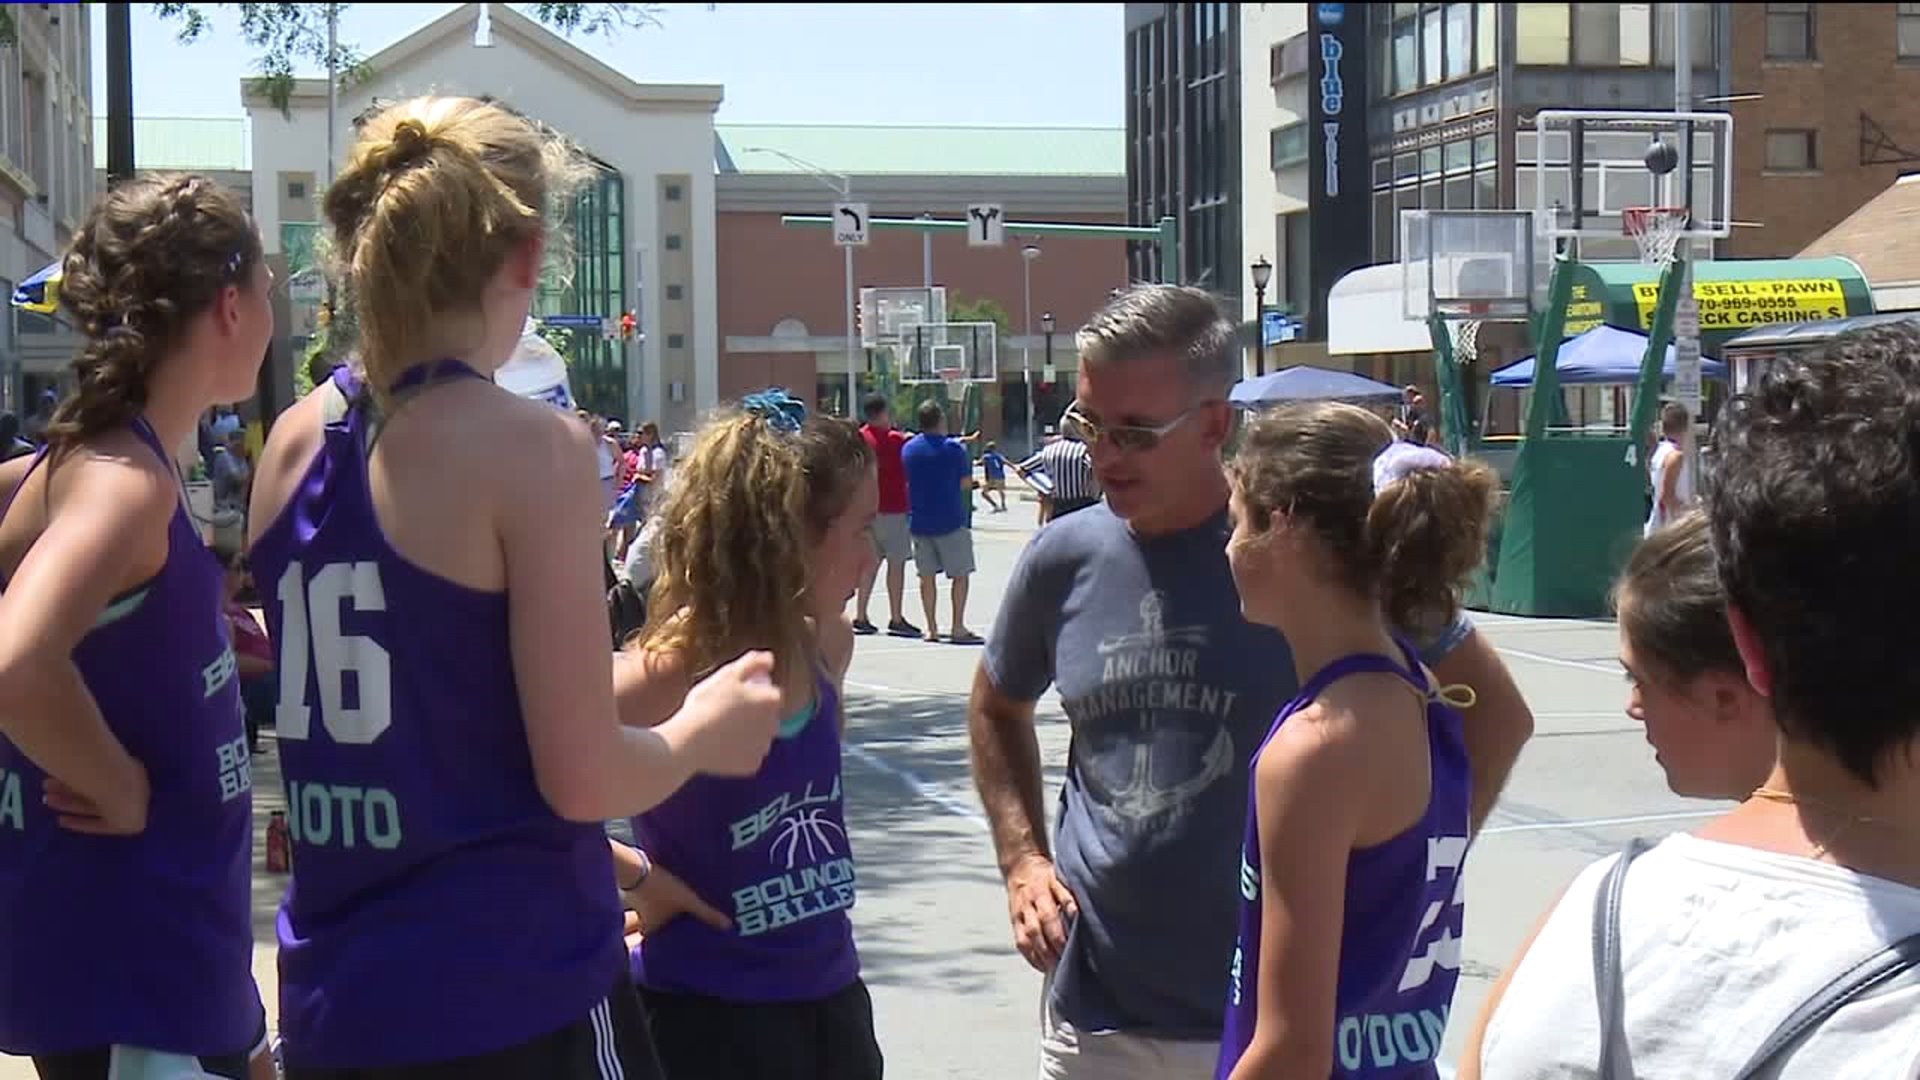 3-on-3 Tournament Continues in Downtown Scranton